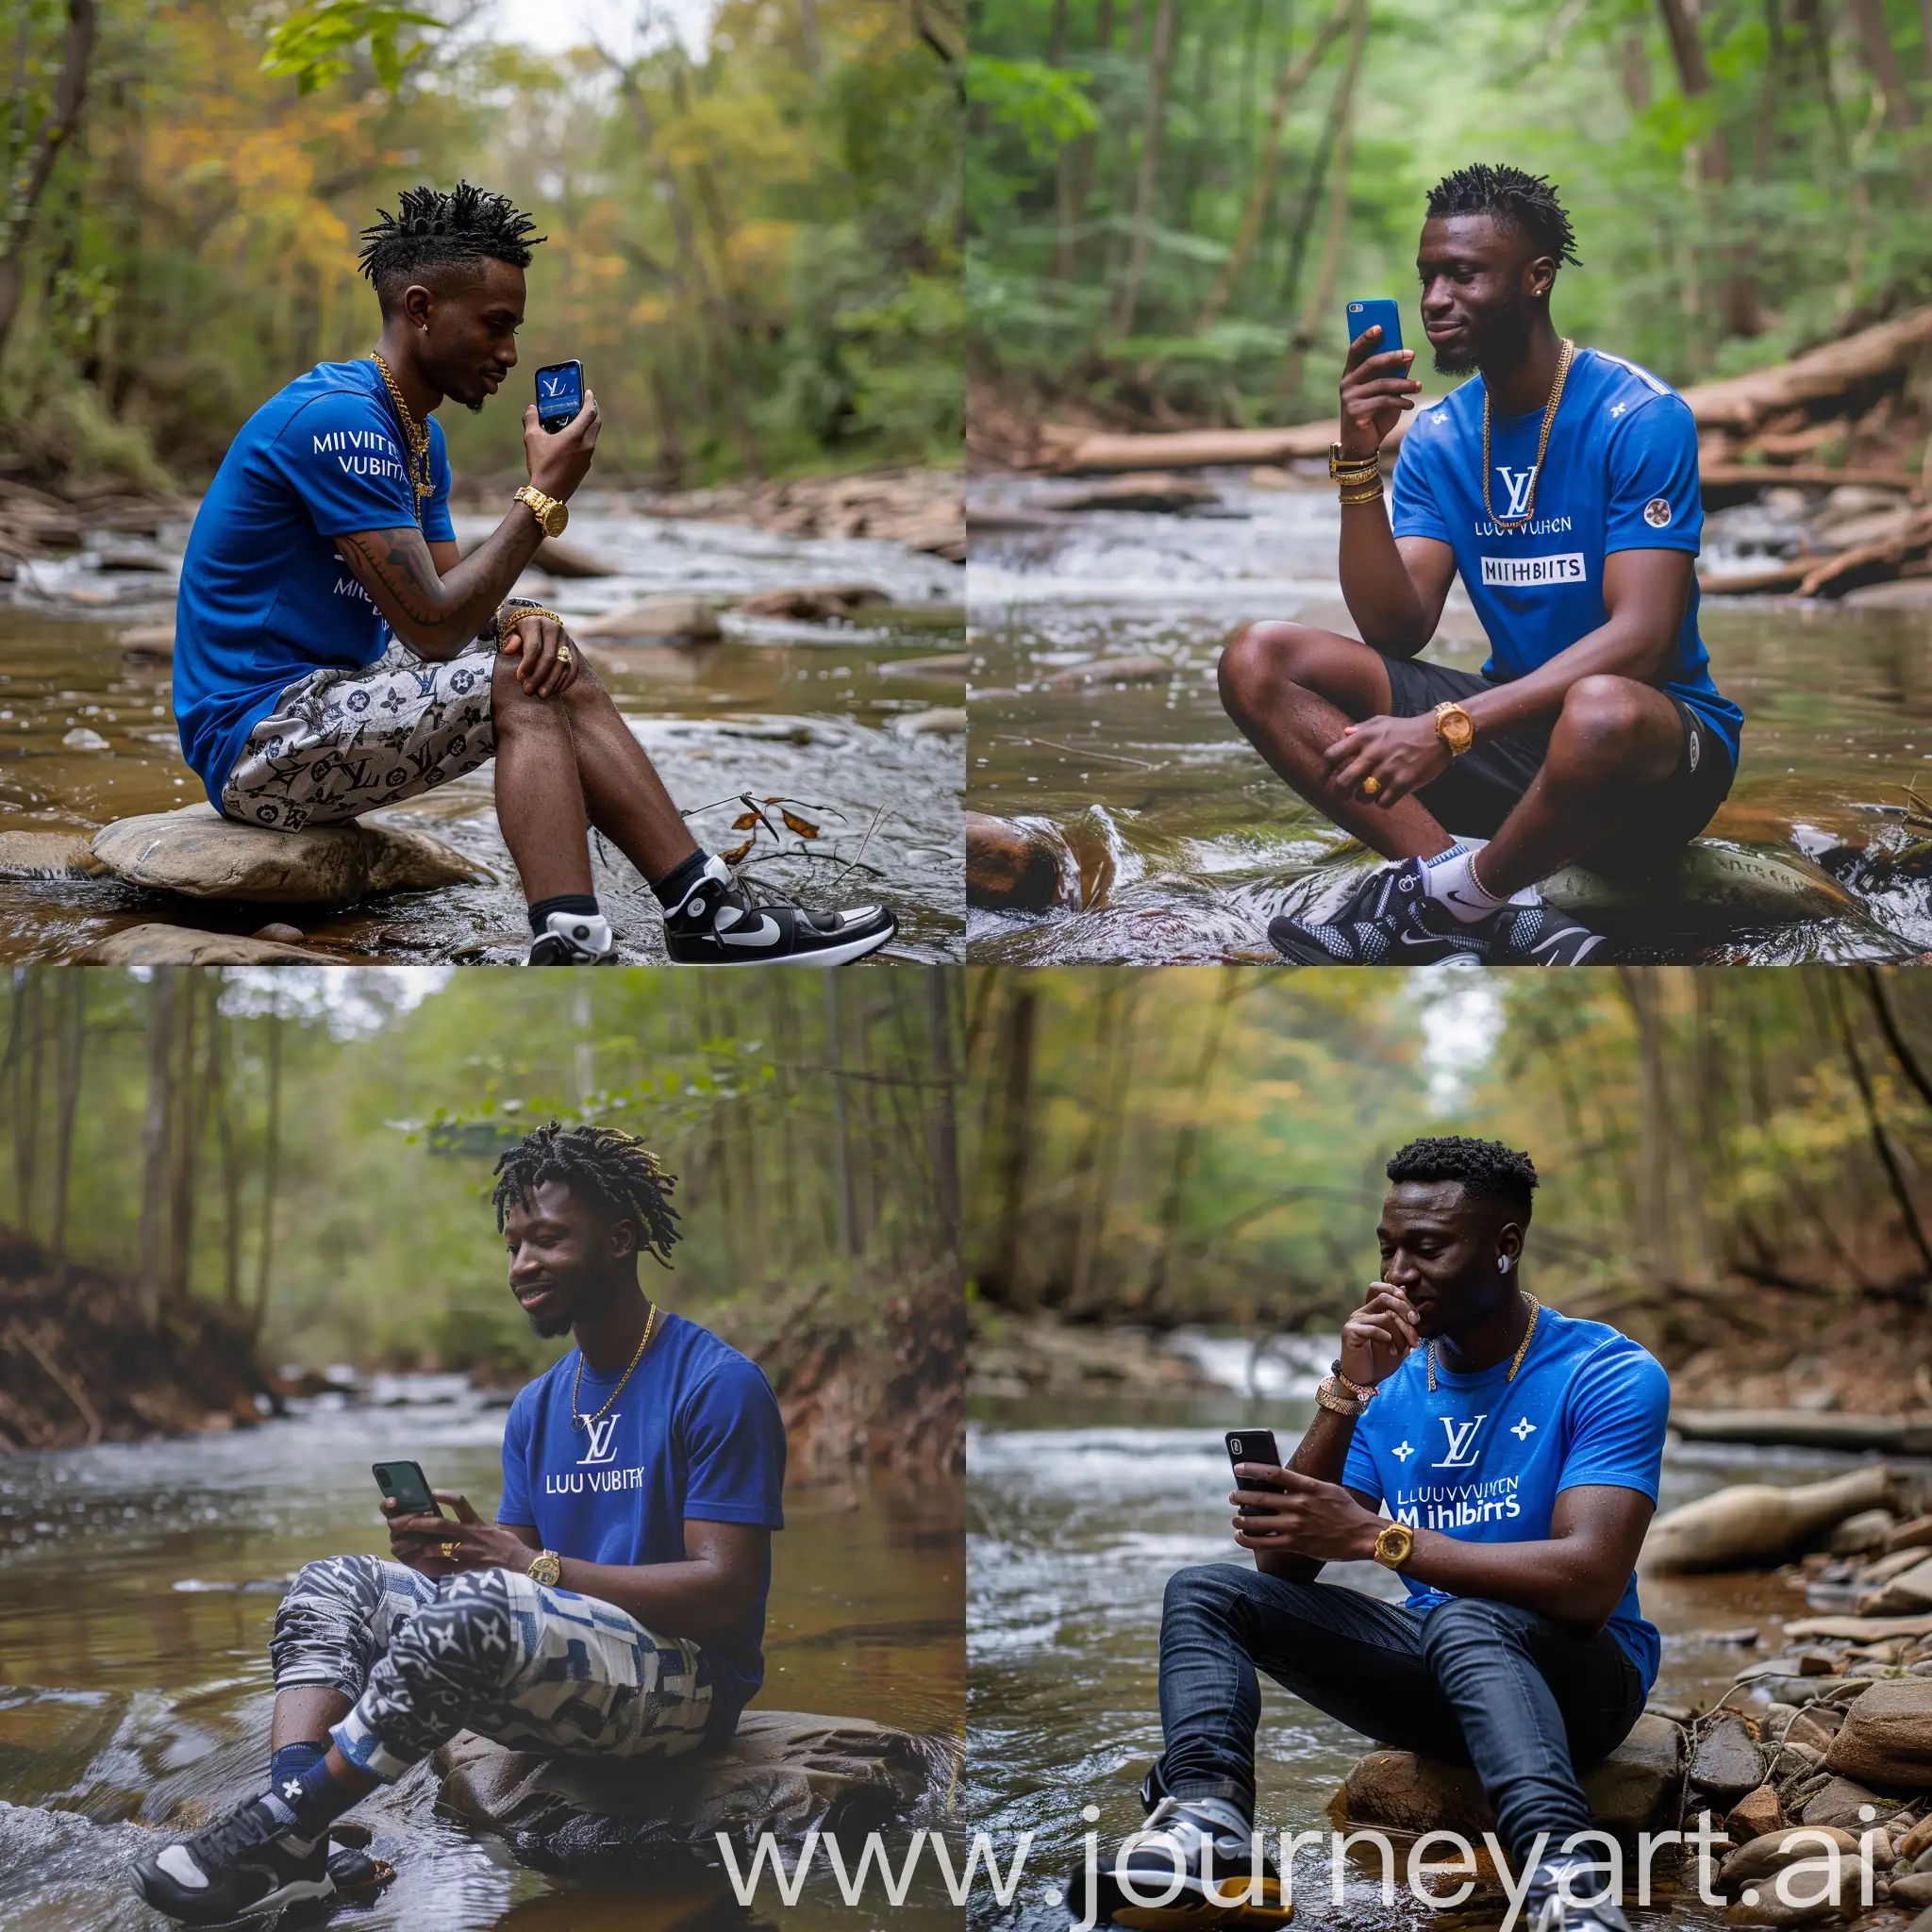 a well groomed humble looking black american young man, mid 20s sitted calmly in the middle of a river in a forest on a stone smiing to an iPhone, side pic, wearing a blue Louis Vuitton t-shirt labelled Milebits and nike vapor max black and white sneakers and a gold watch